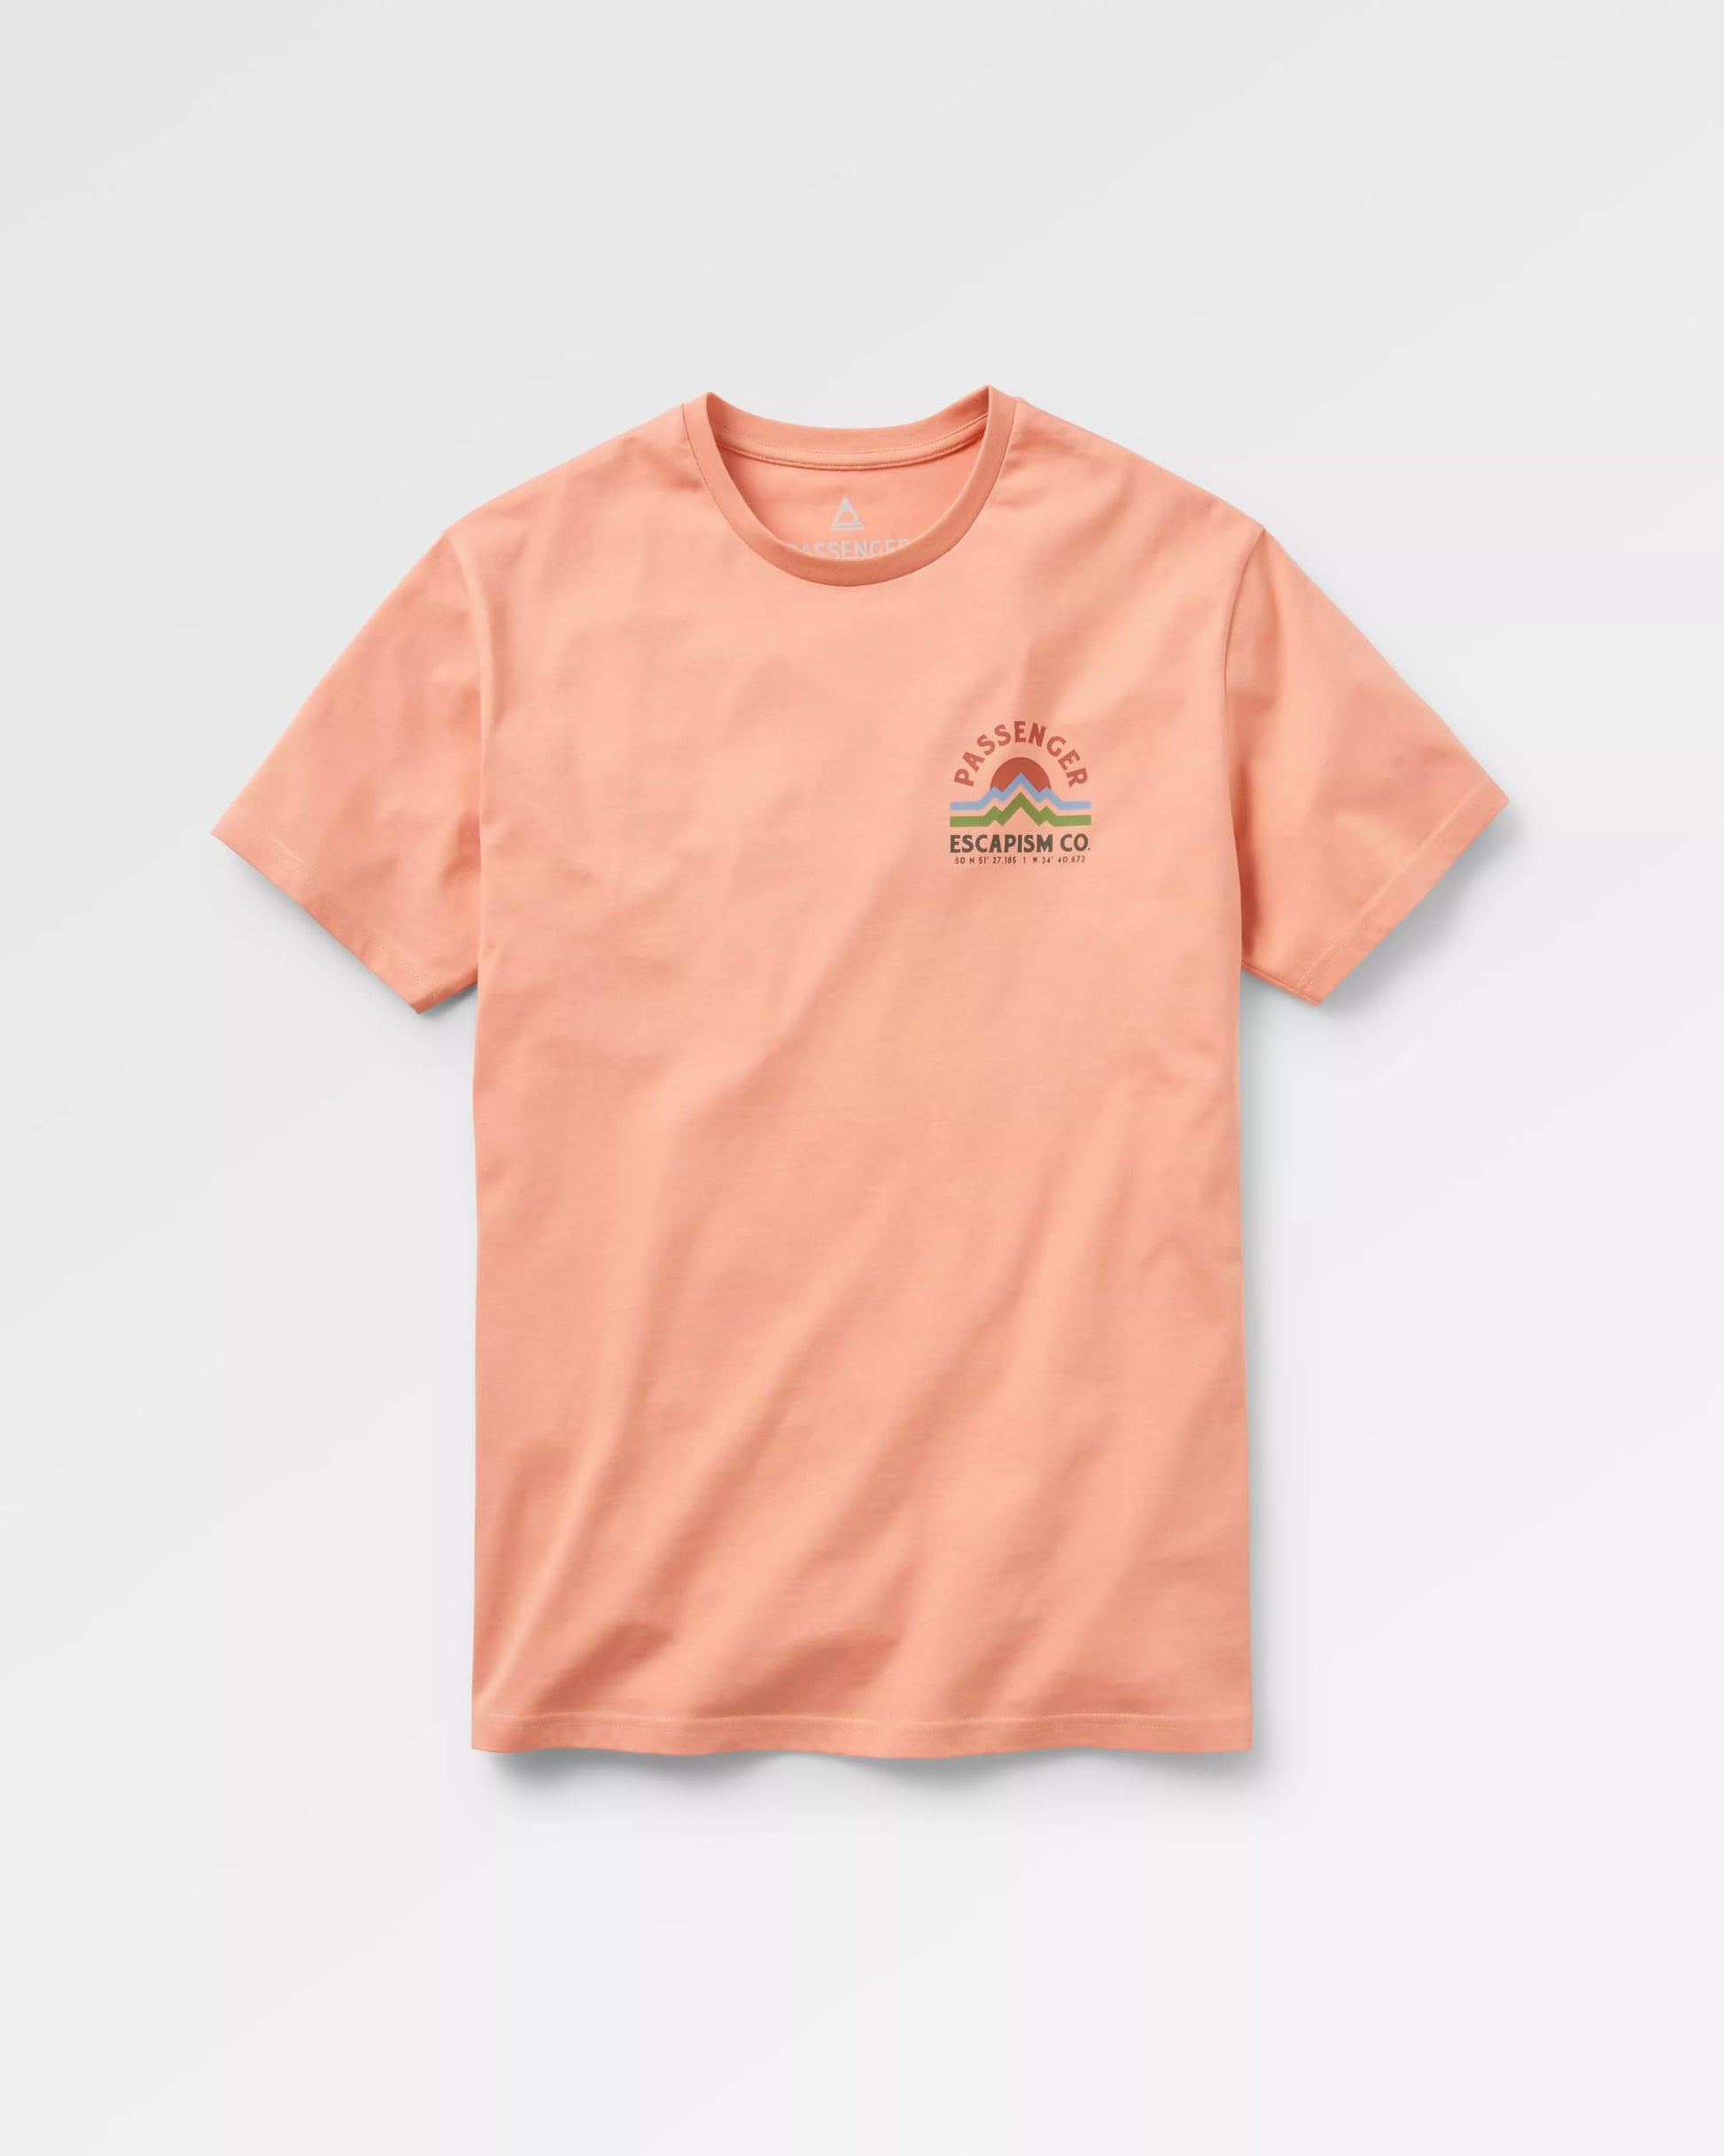 Dumont Organic Relaxed Fit T-Shirt - Tawny Peach